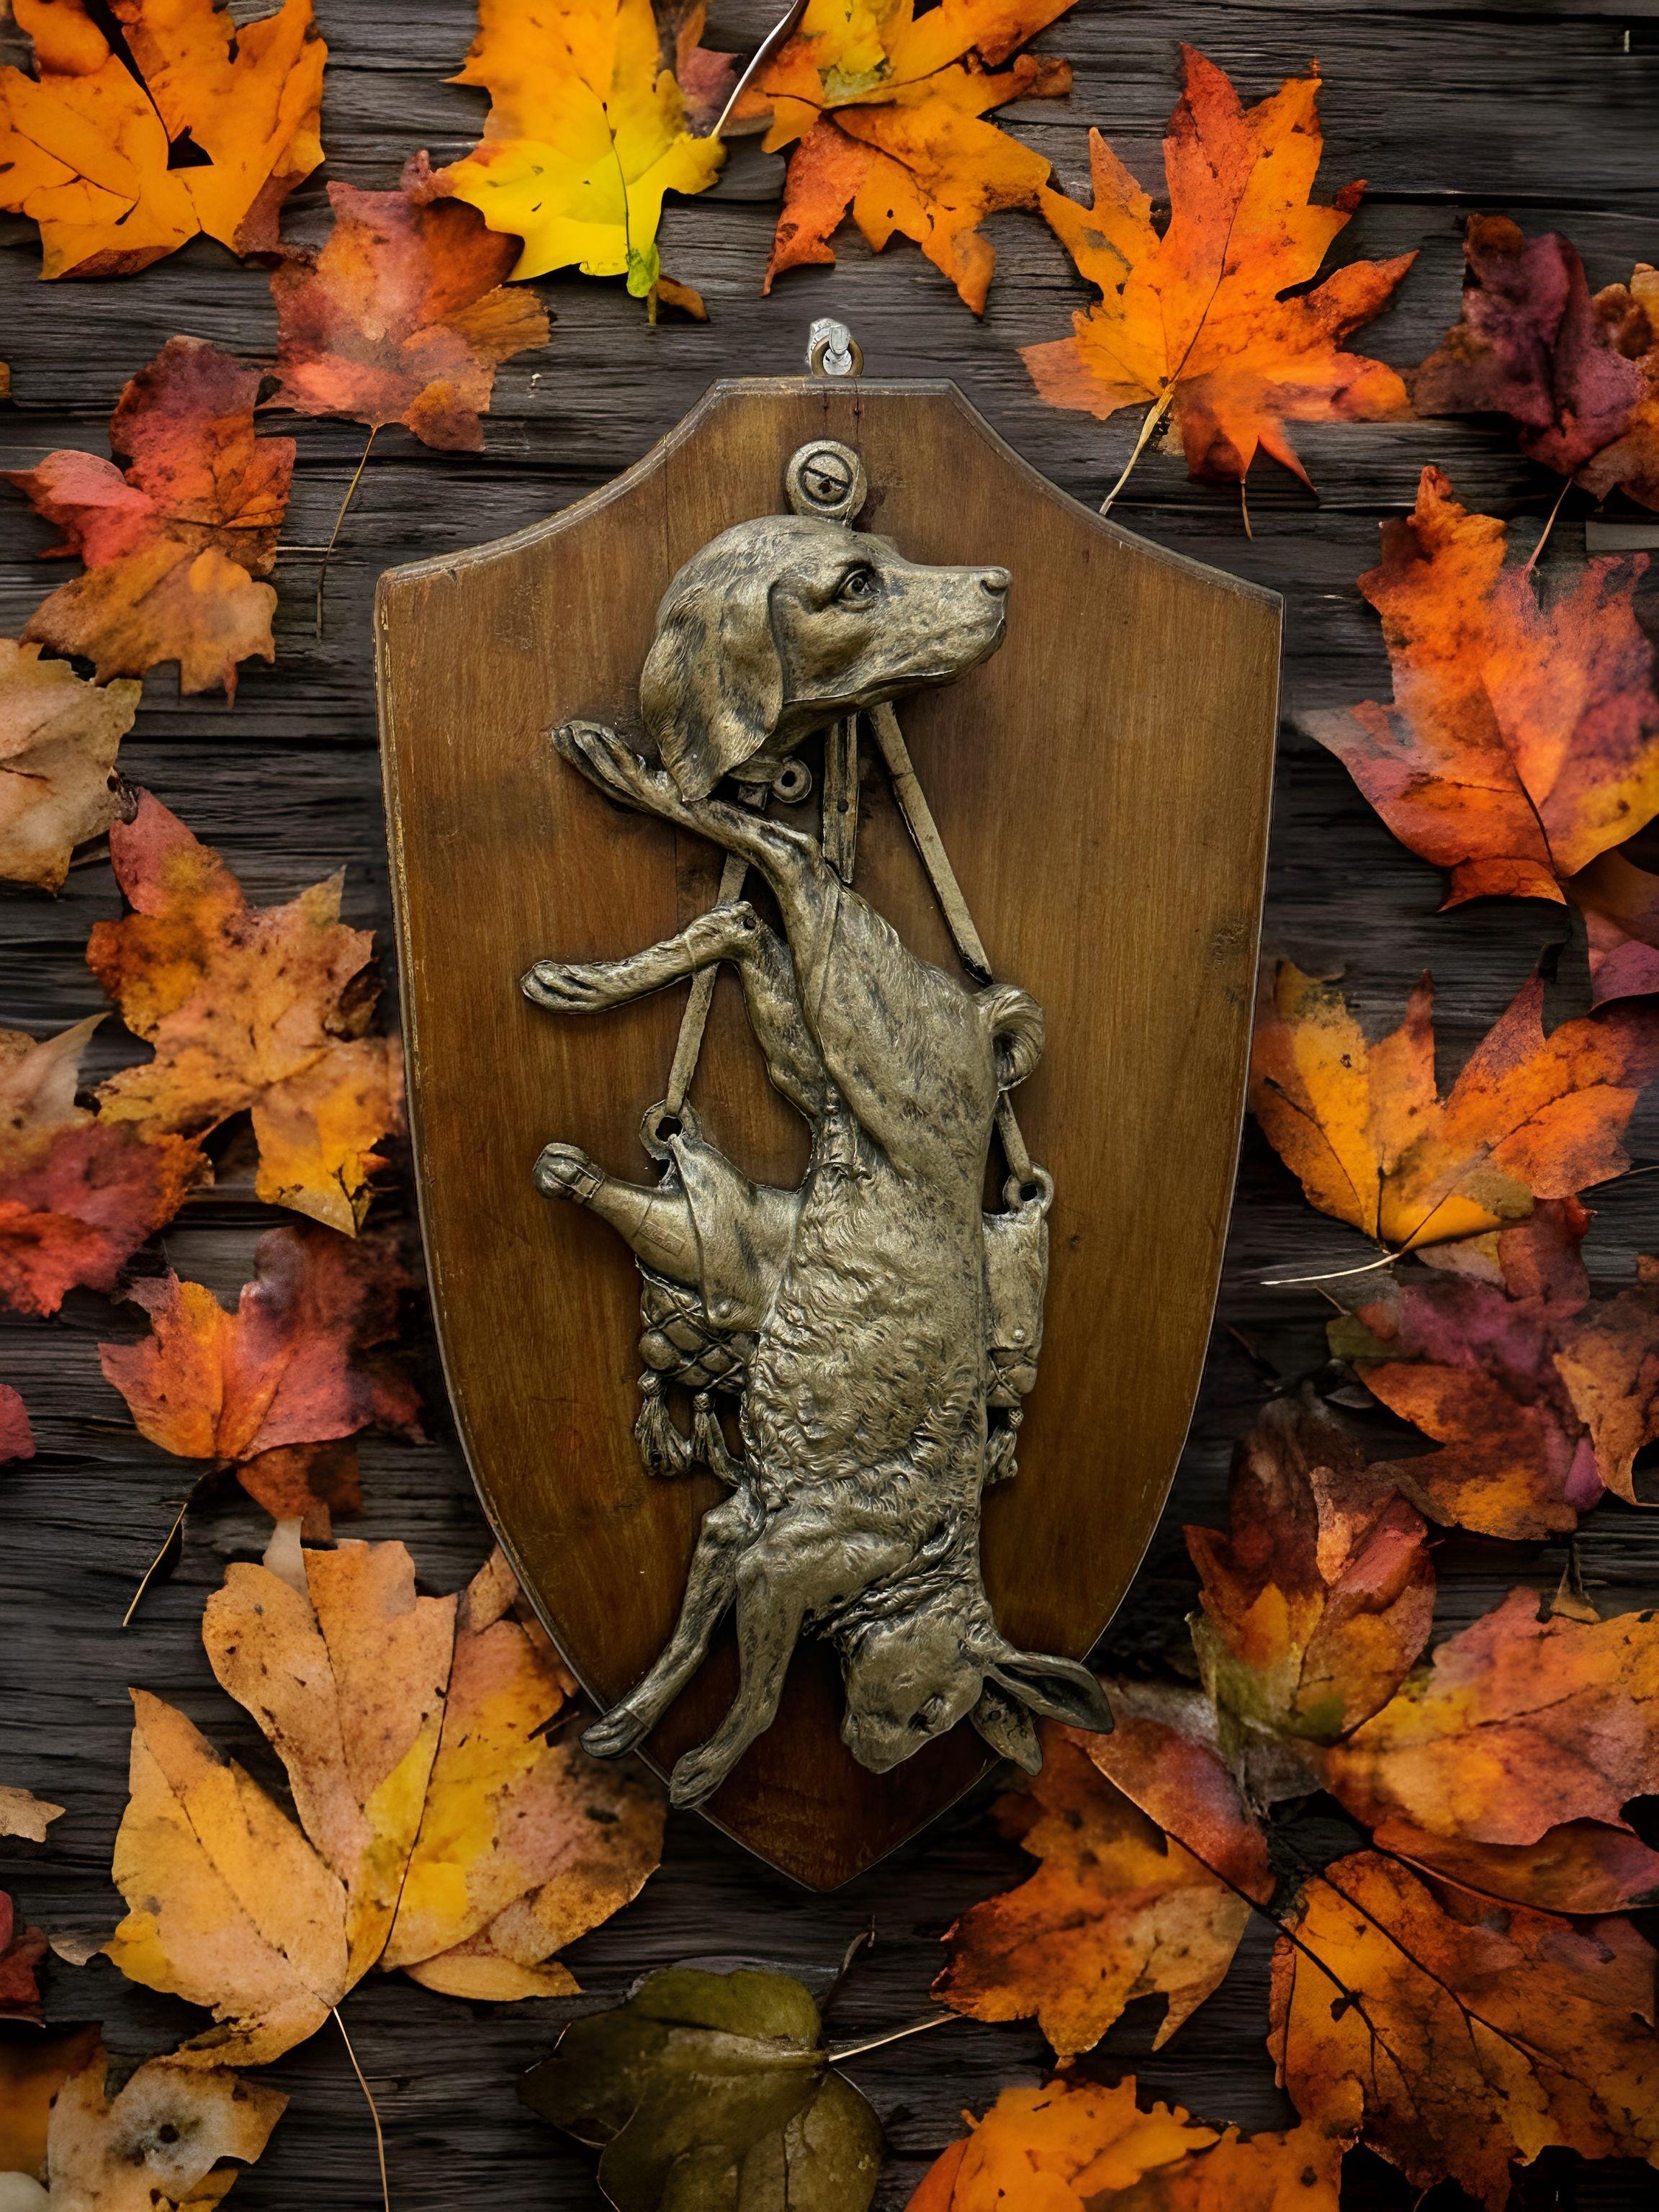 Rare antique large German metal hunt scene on a wooden wall plaque trophy depicting a Rabbit, a dog and a bag with a champagne bottle.
Wonderful Trophy of the Hunt for your Black Forest Collection. This is a truly fine older piece. 
Great lodge or